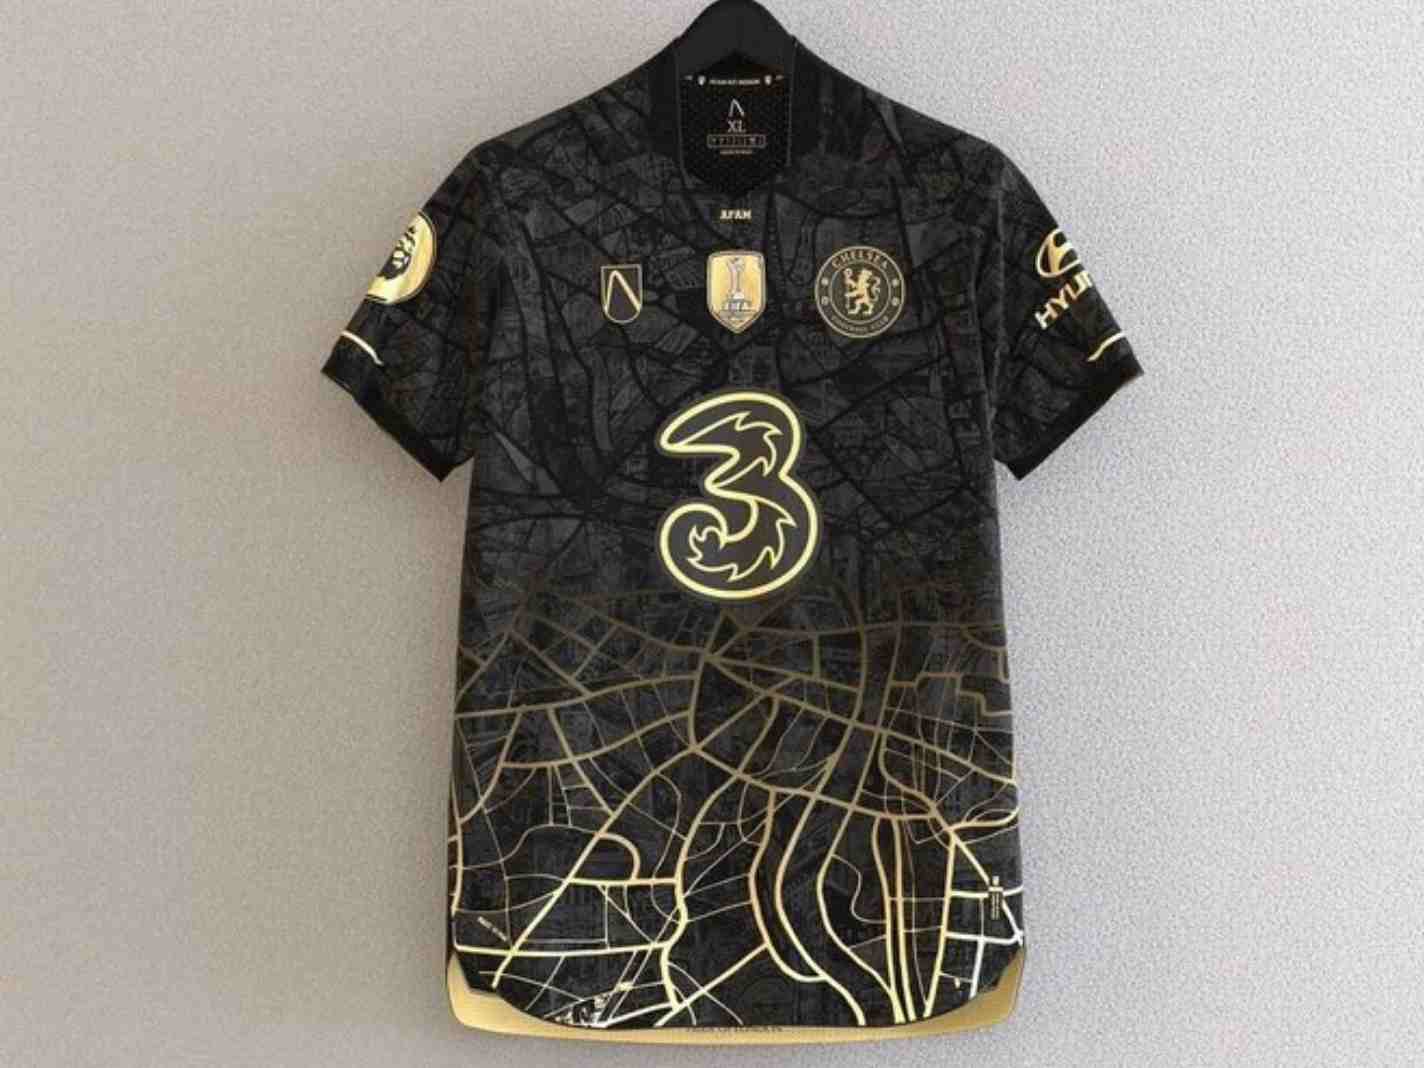 Chelsea fans drool over concept kit inspired by map of London